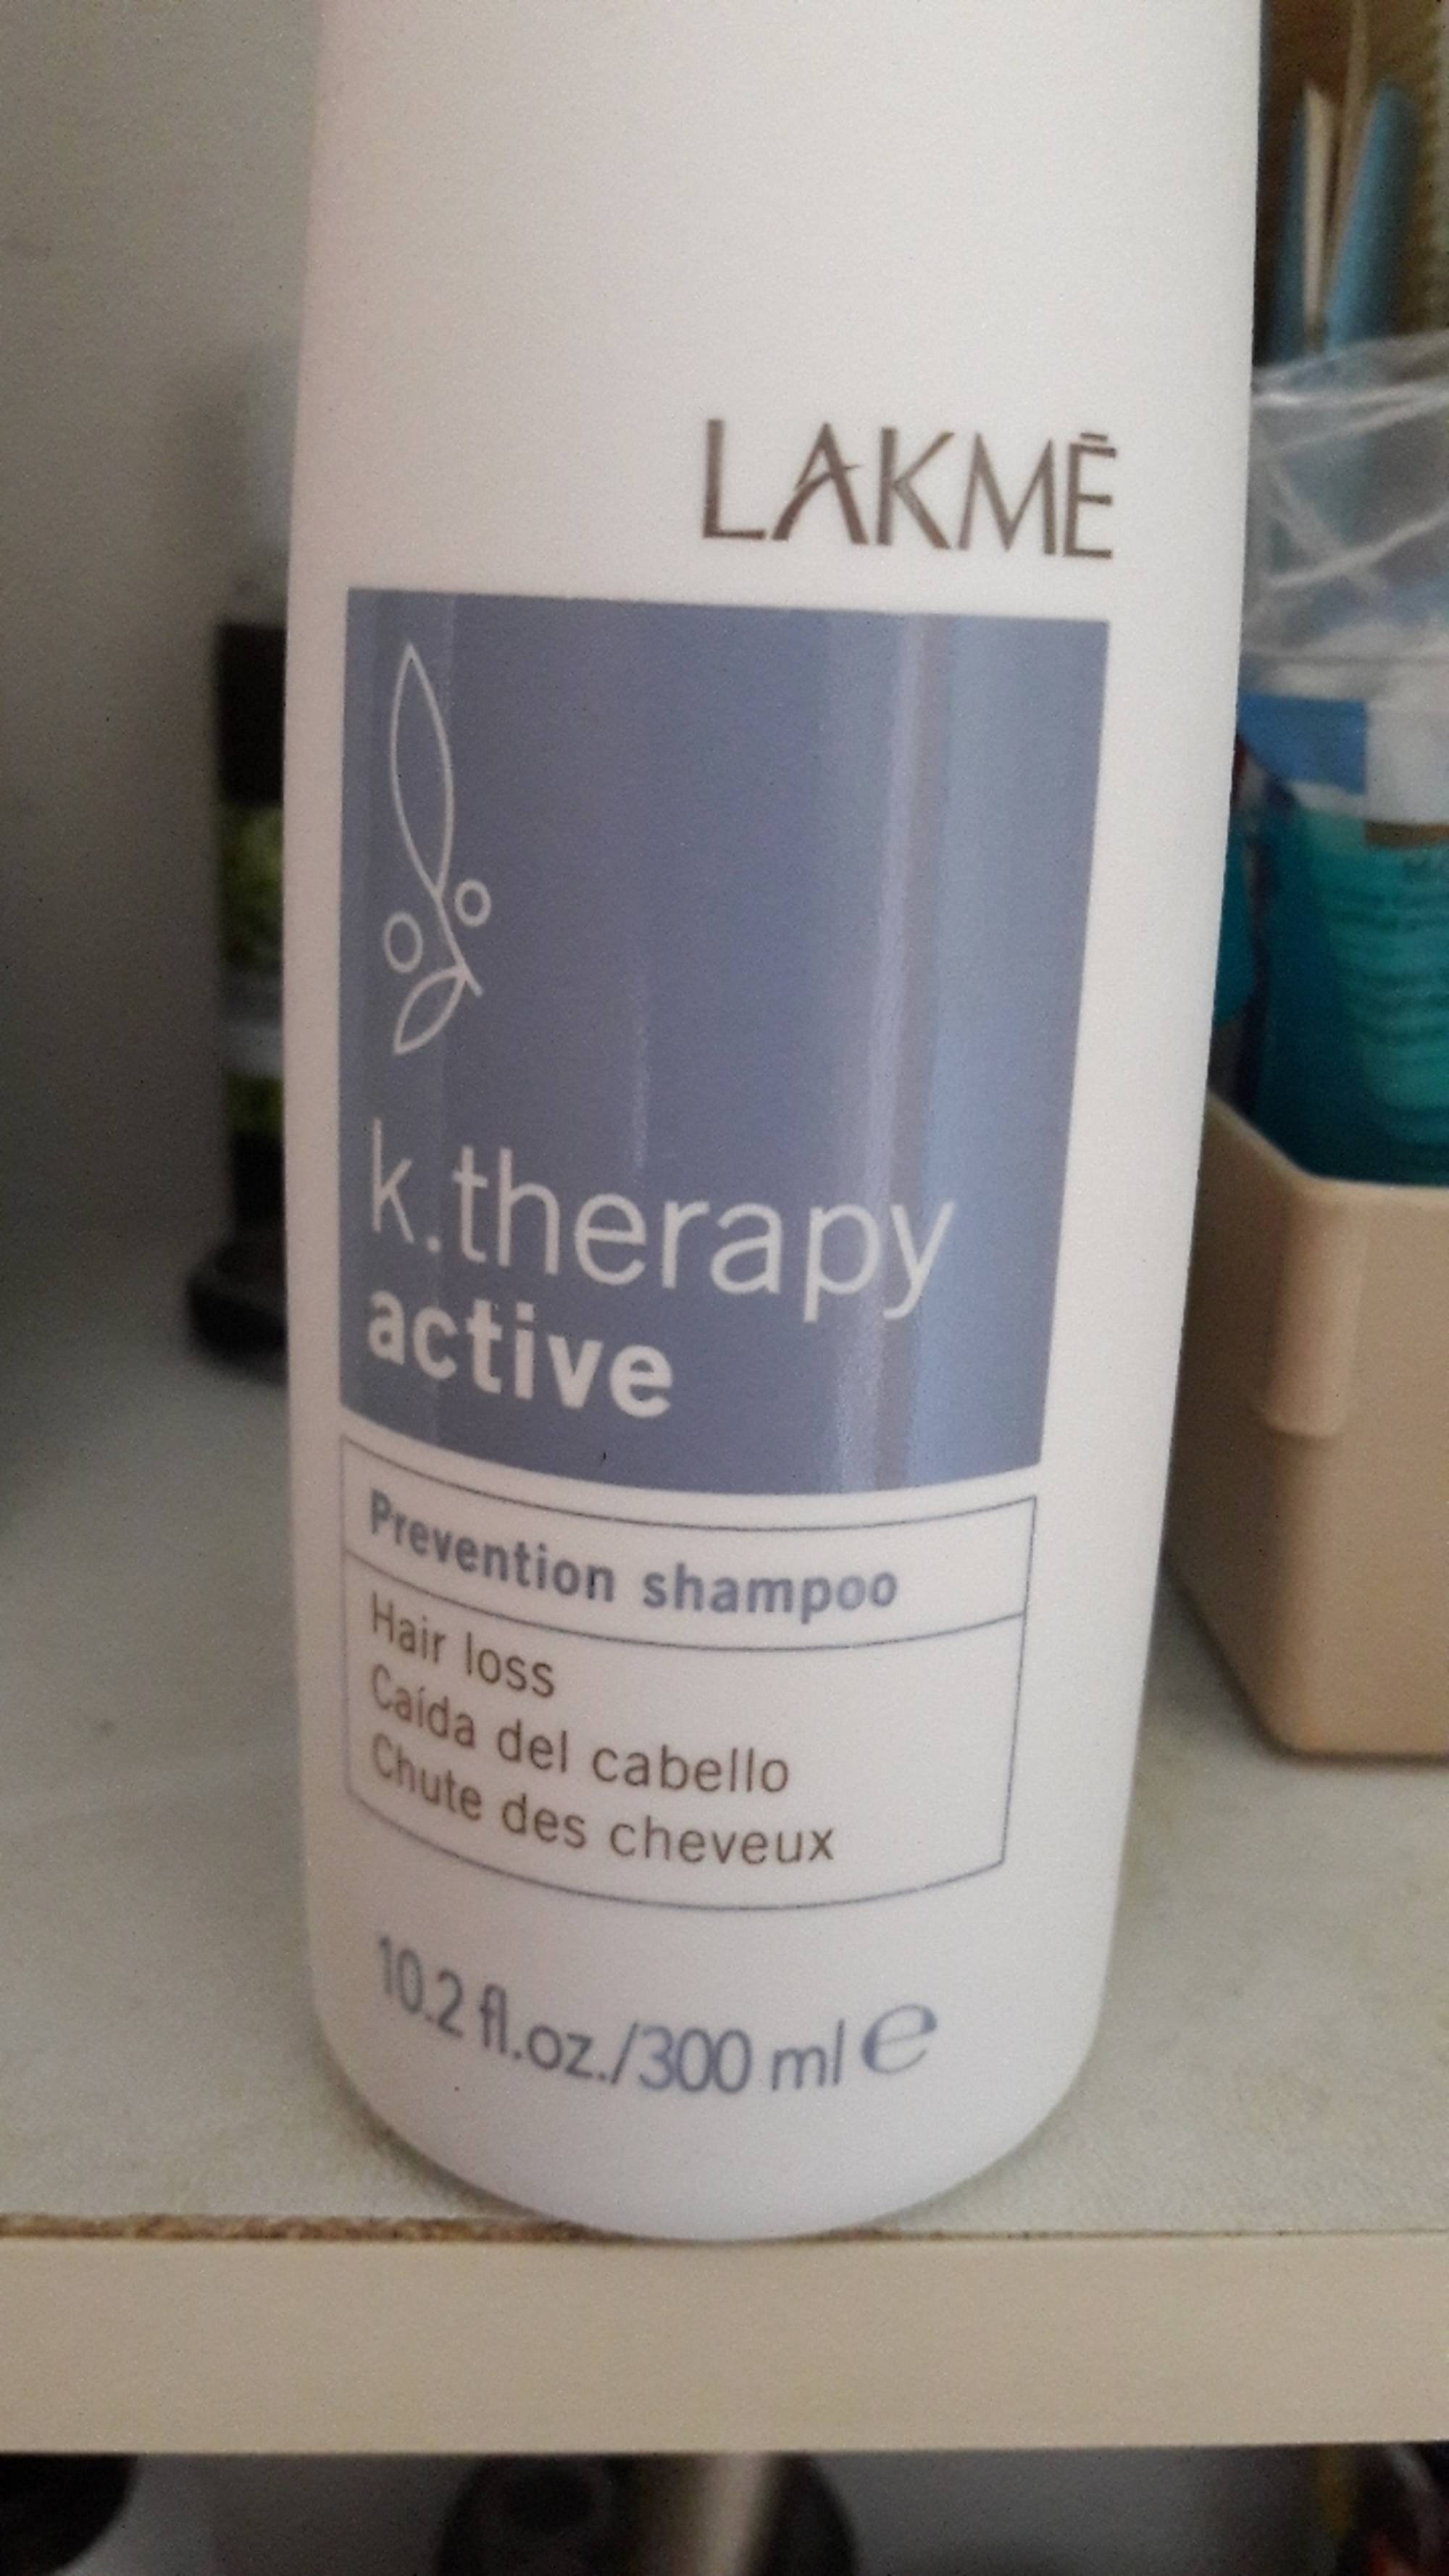 LAKME - K.Therapy active - Prevention shampoo